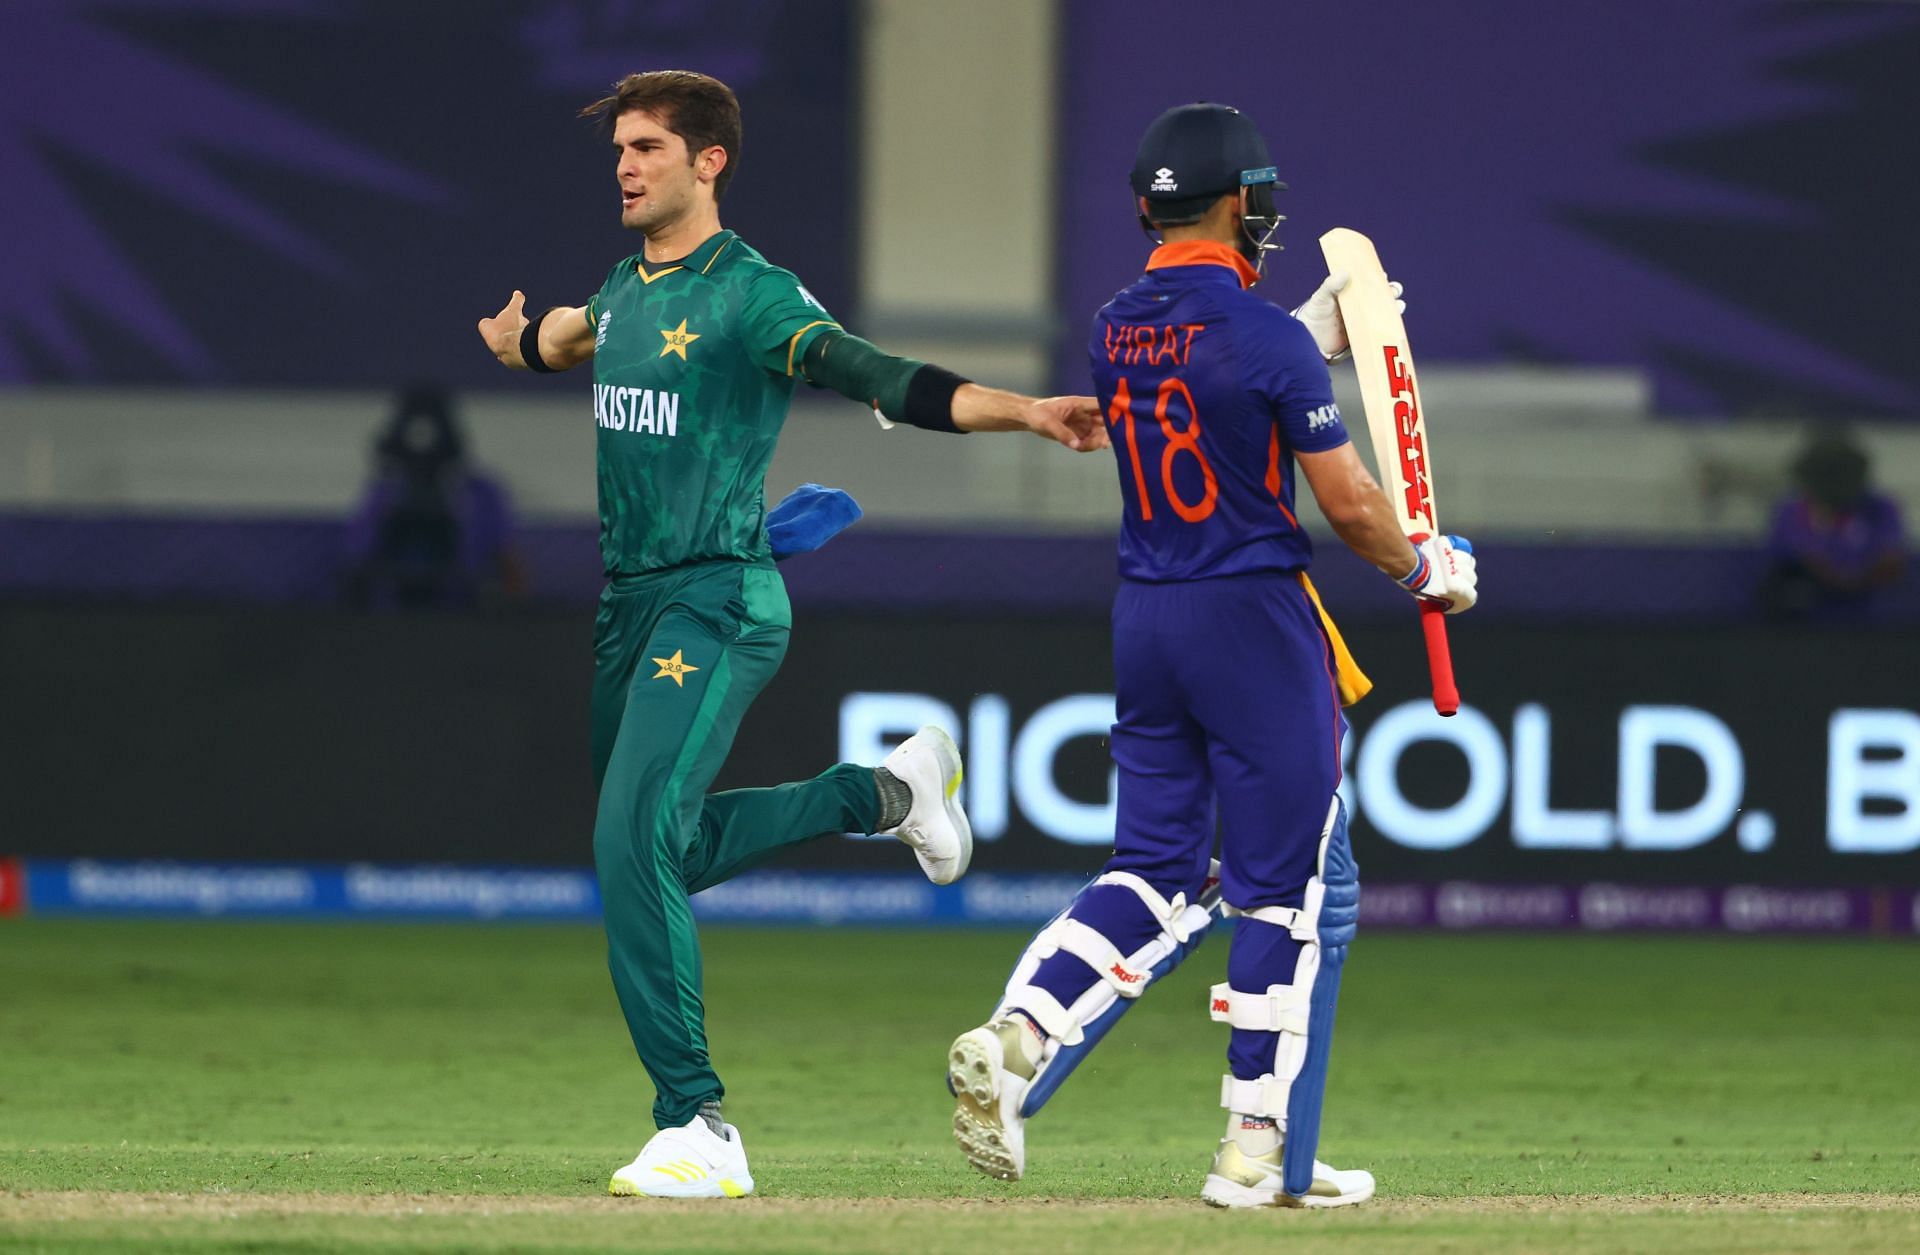 Shaheen Afridi returned with figures of 3/31